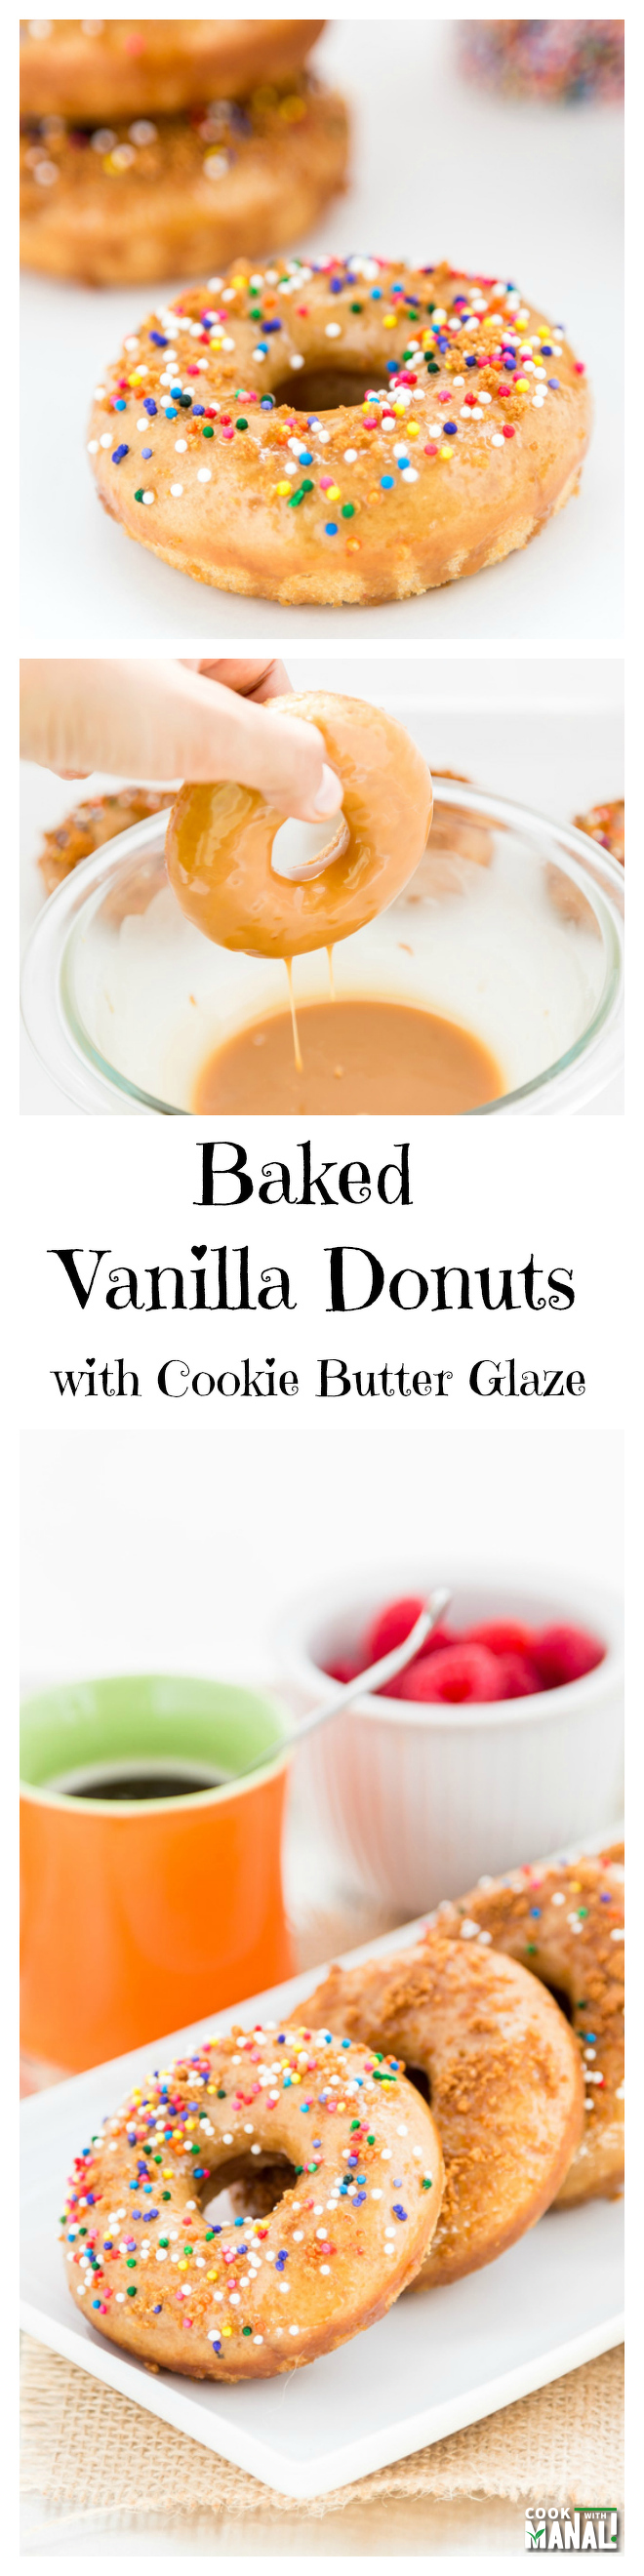 Vanilla-Donuts-with-Cookie-Butter-Glaze-Collage